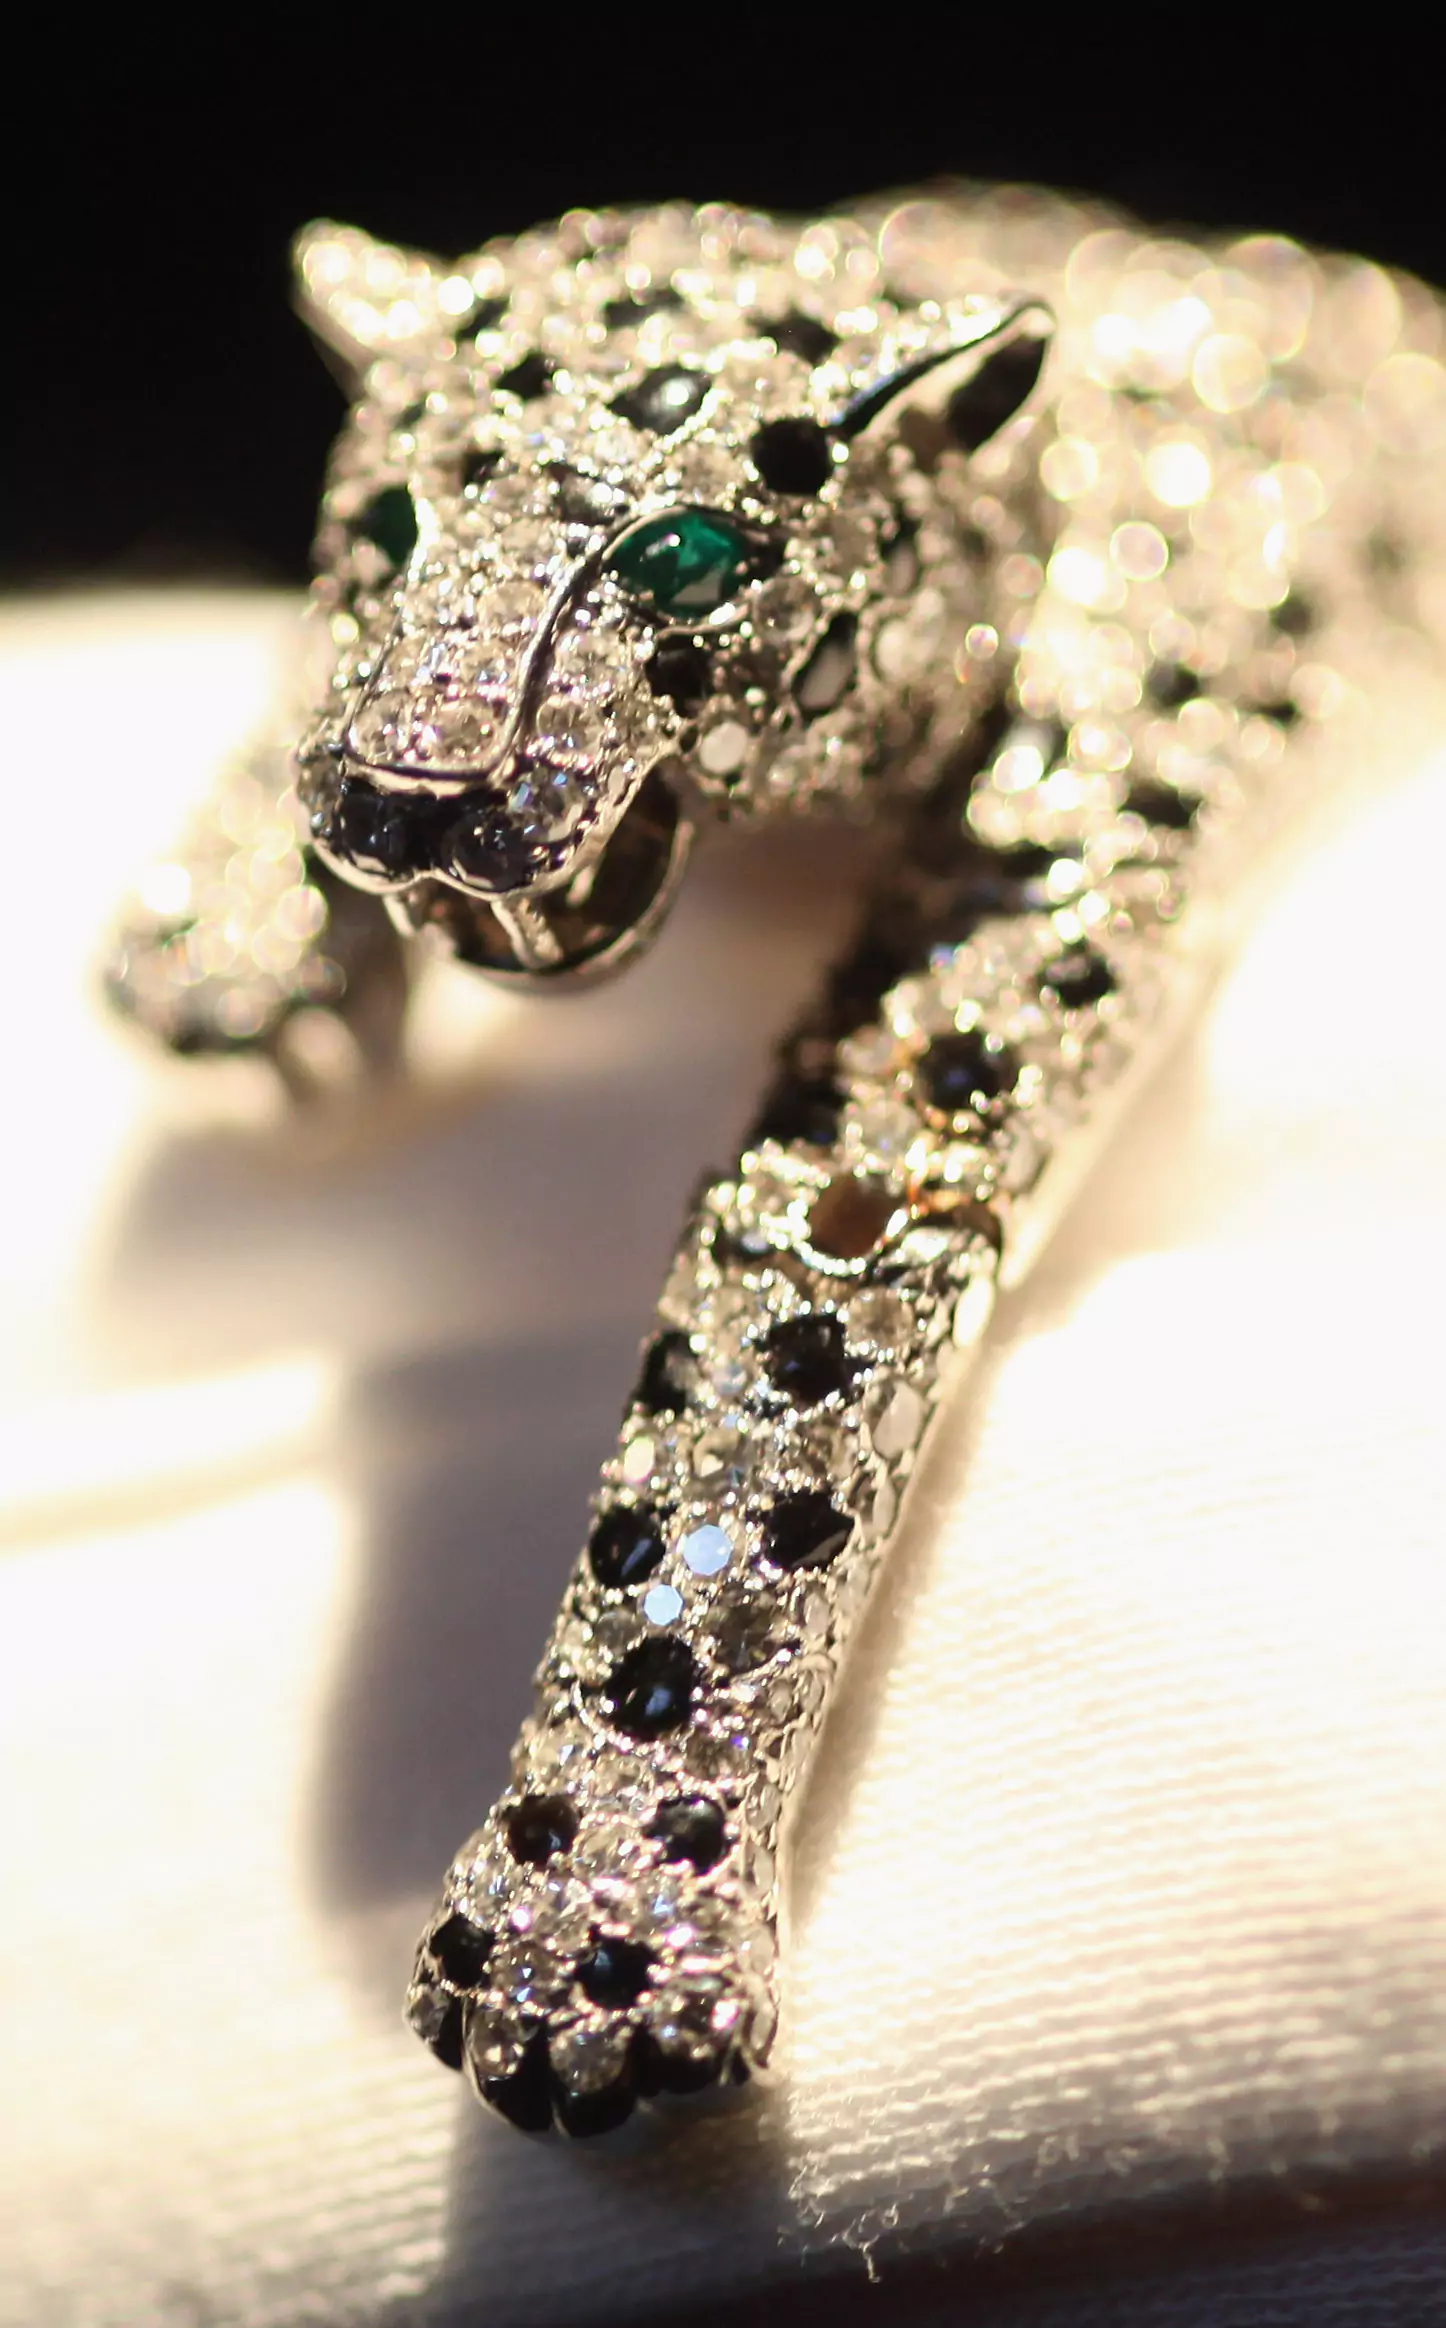 Cartier Panther bracelet photo by Dan Kitwood via Getty Images